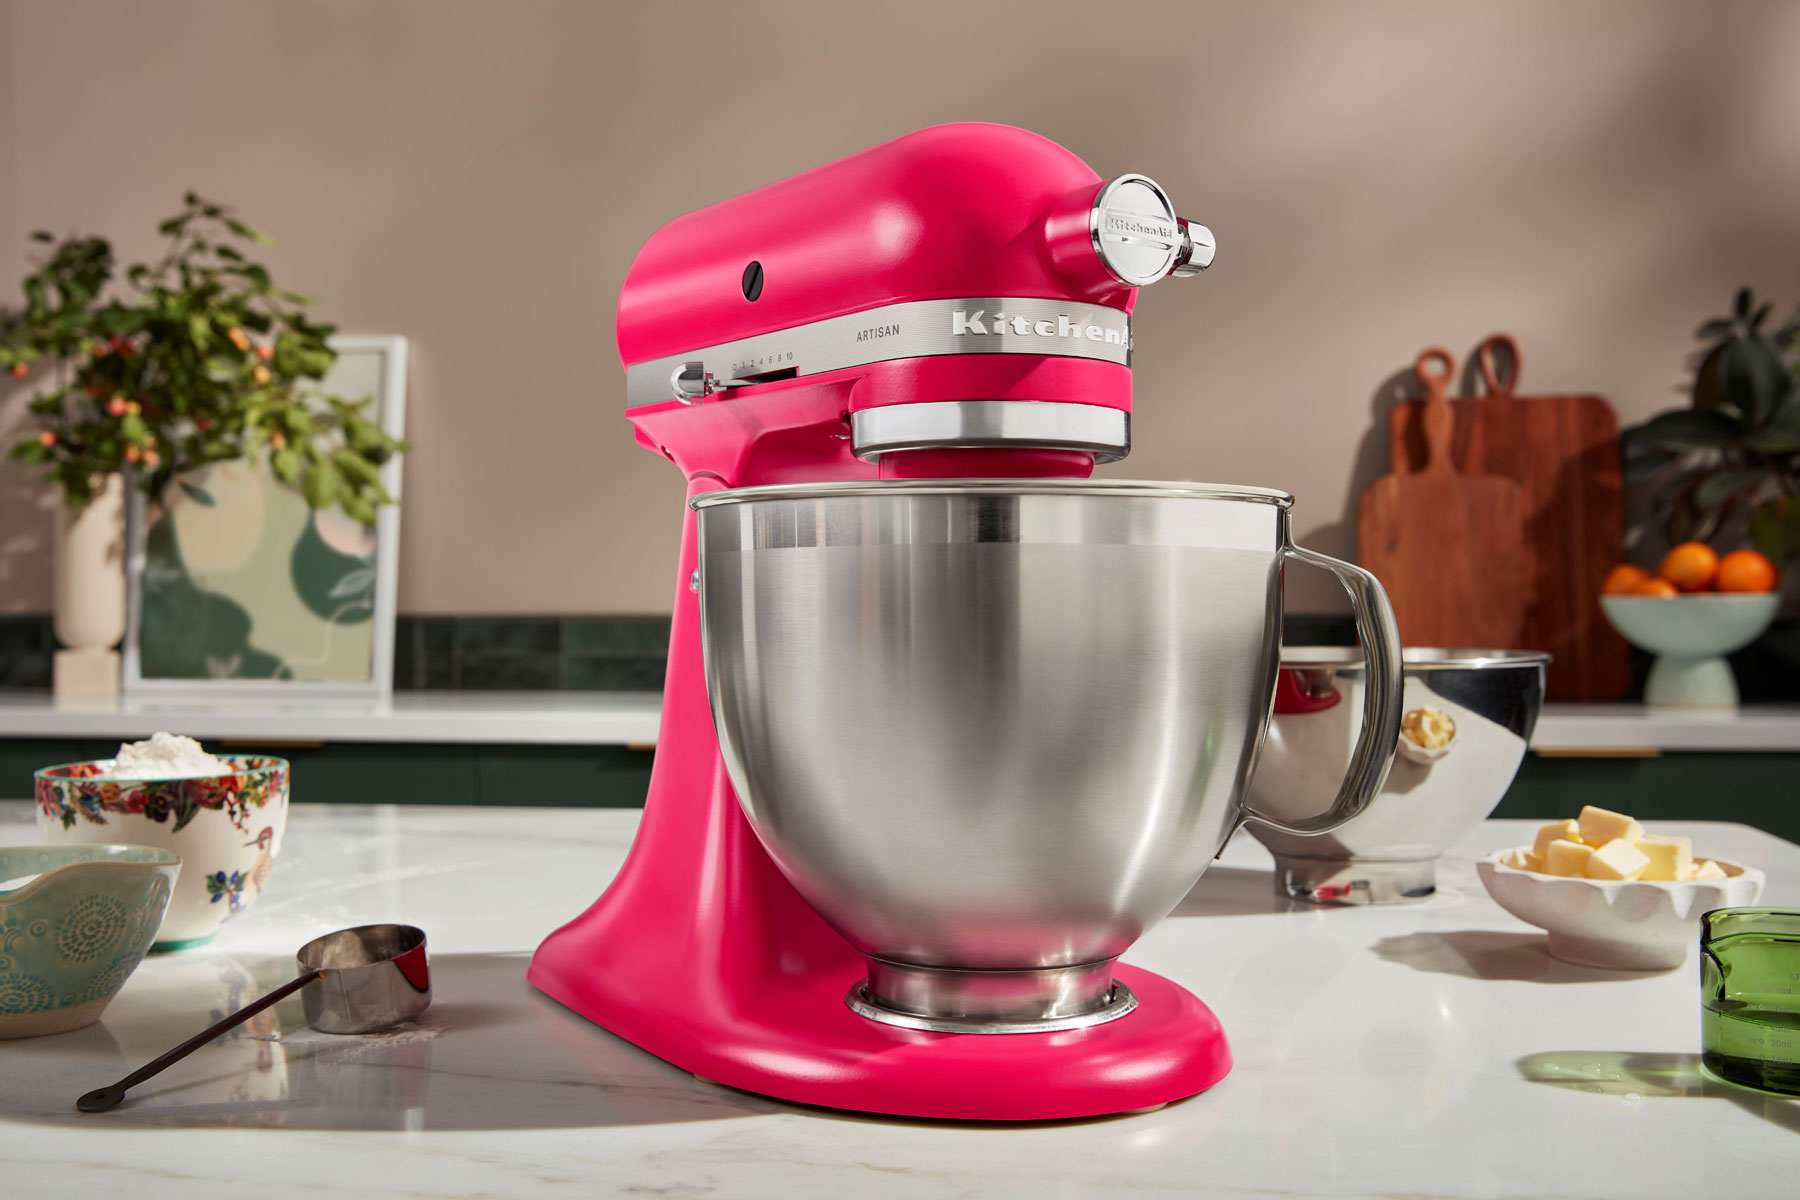 2023 Of Year As For Hibiscus The Colour Its Chooses KitchenAid